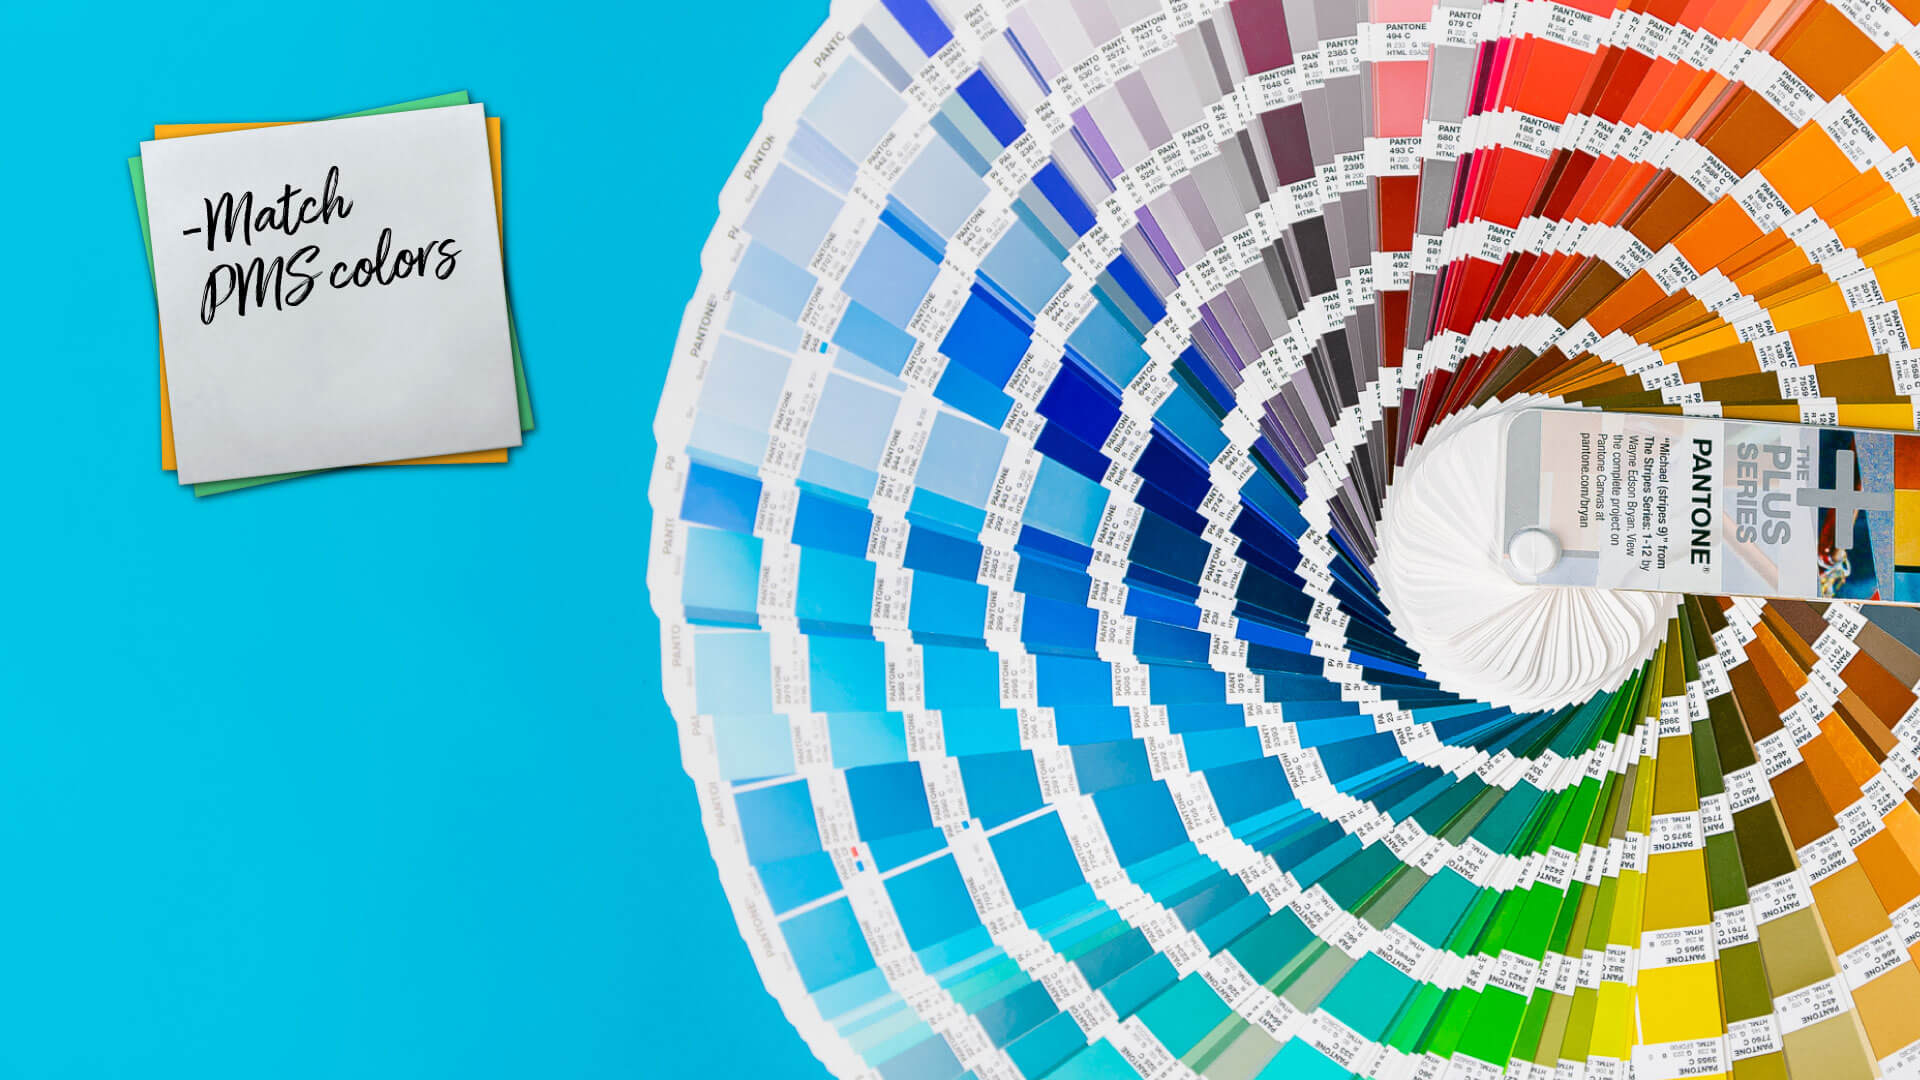 Pantone Colors & the Important Role they Play in Co-Branding